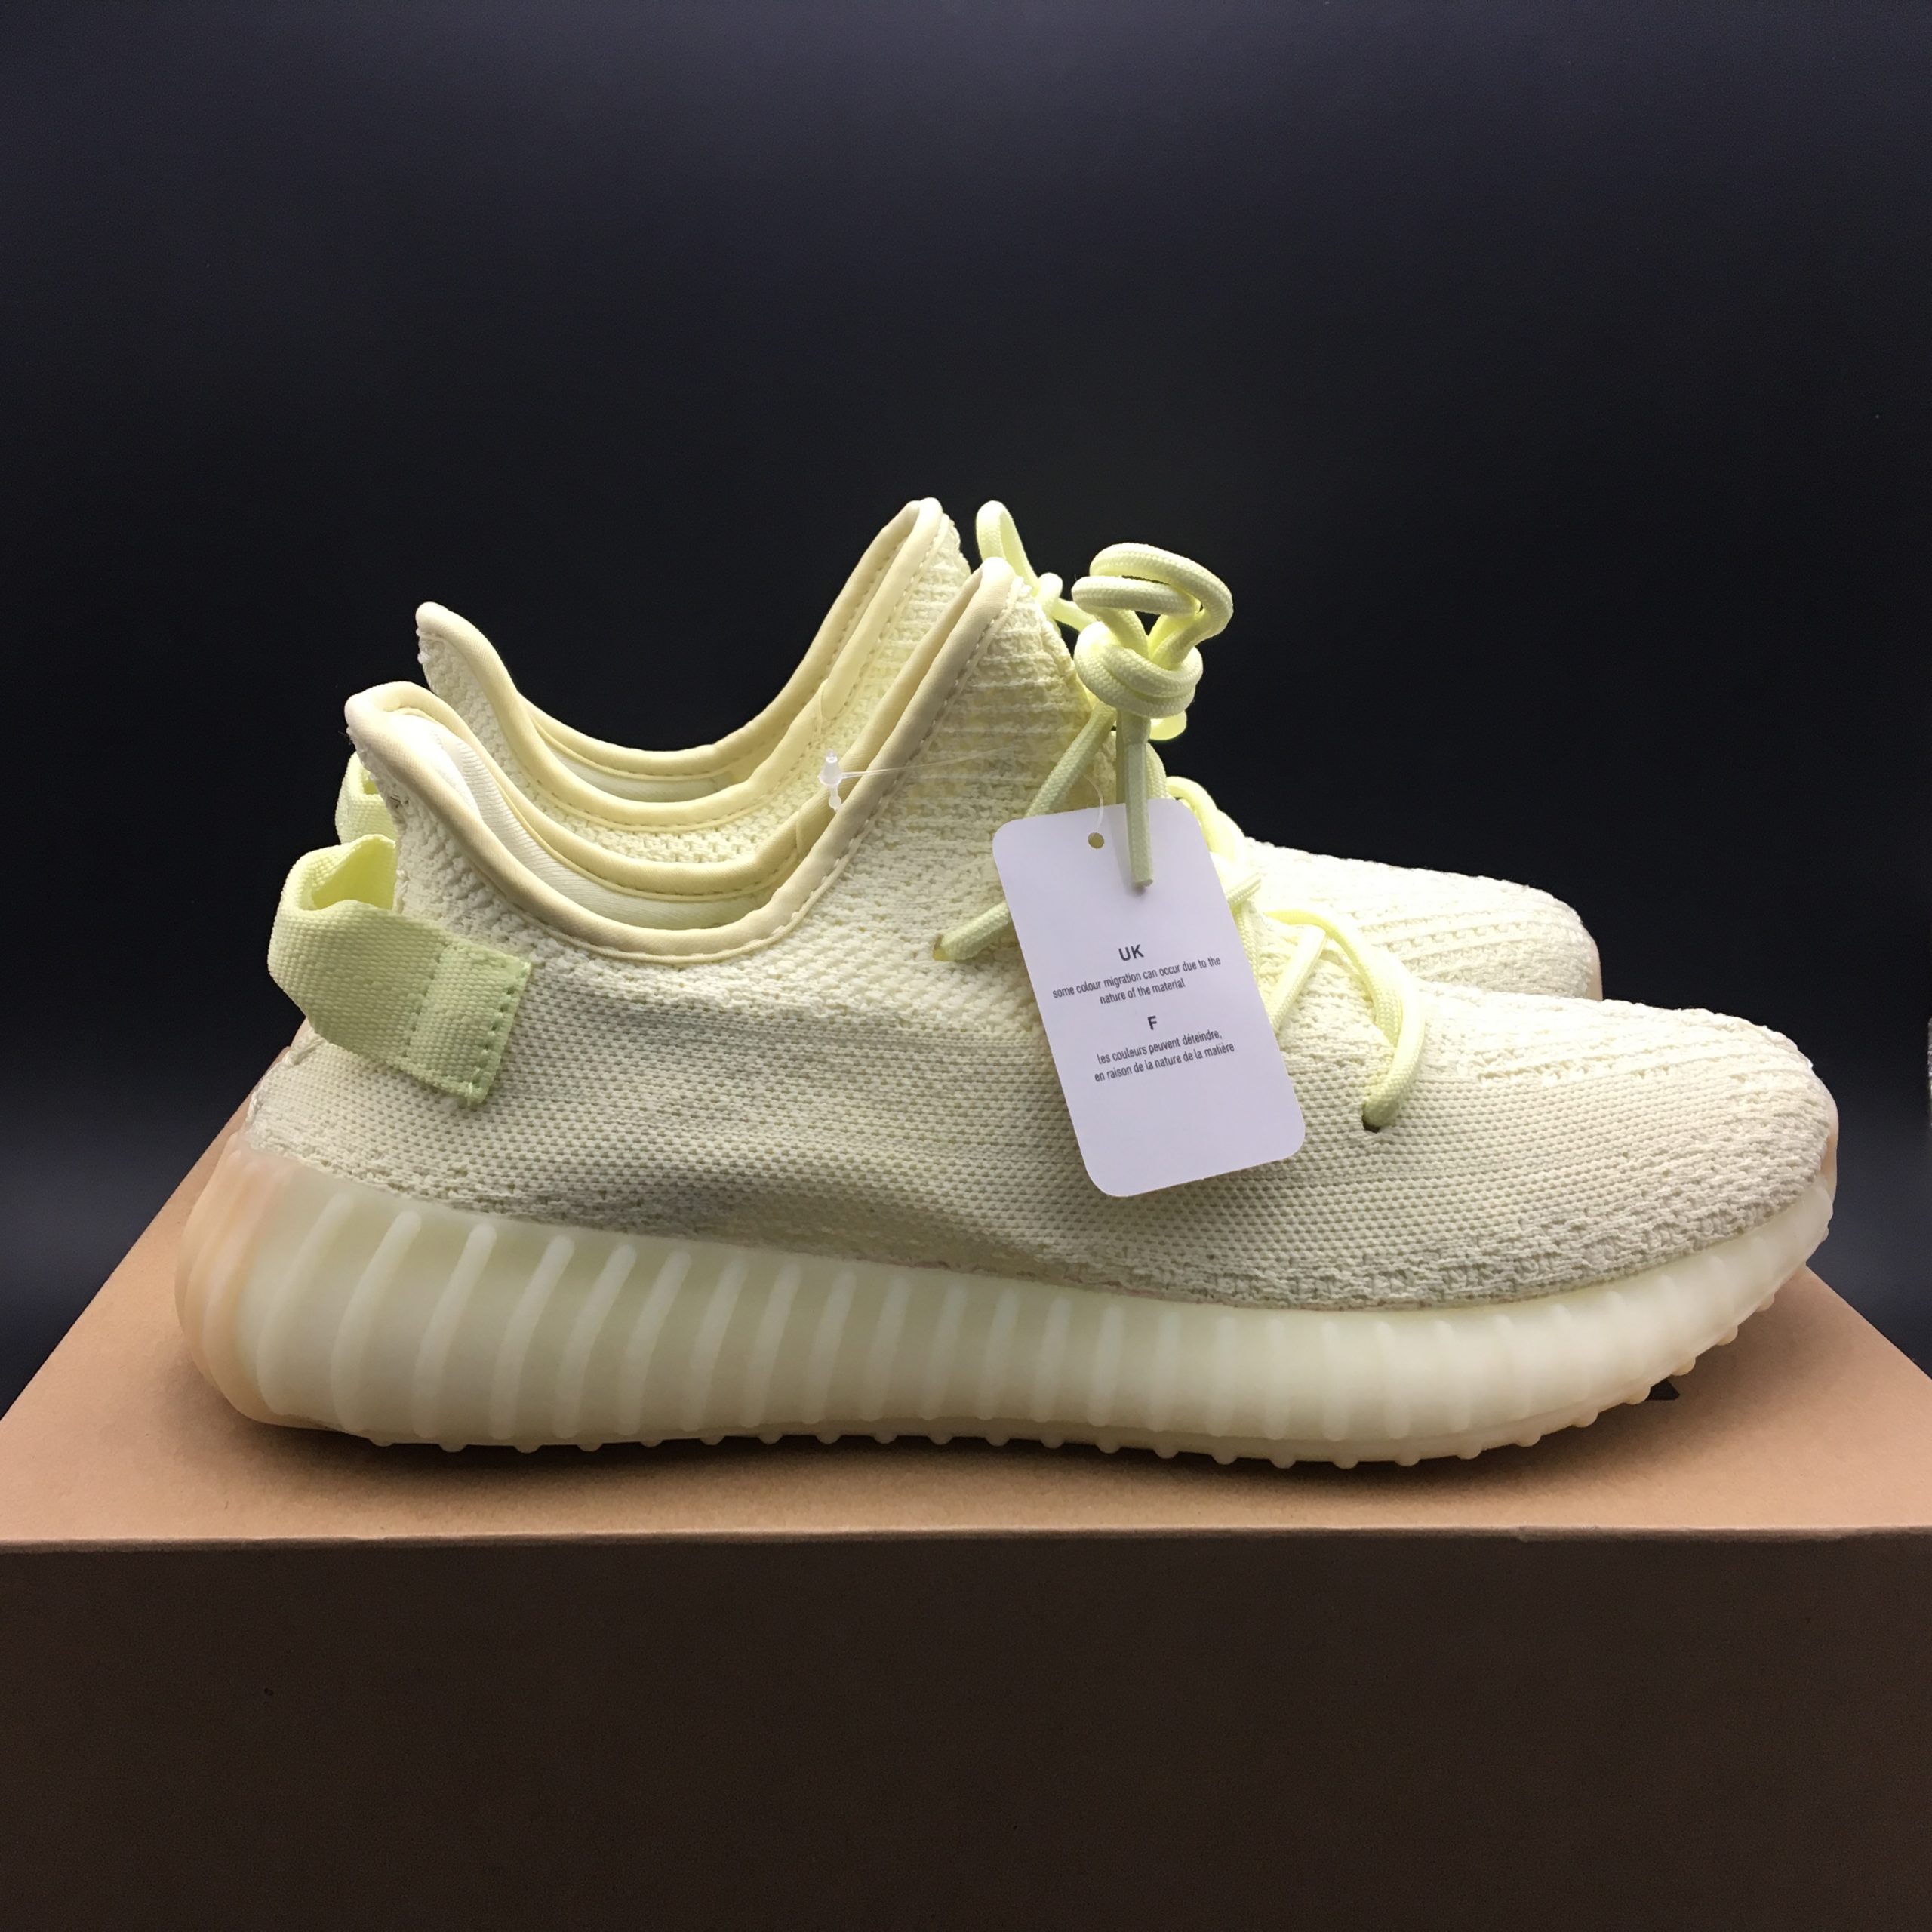 Adidas Yeezy 350 Boost V2 Butter F36980_10